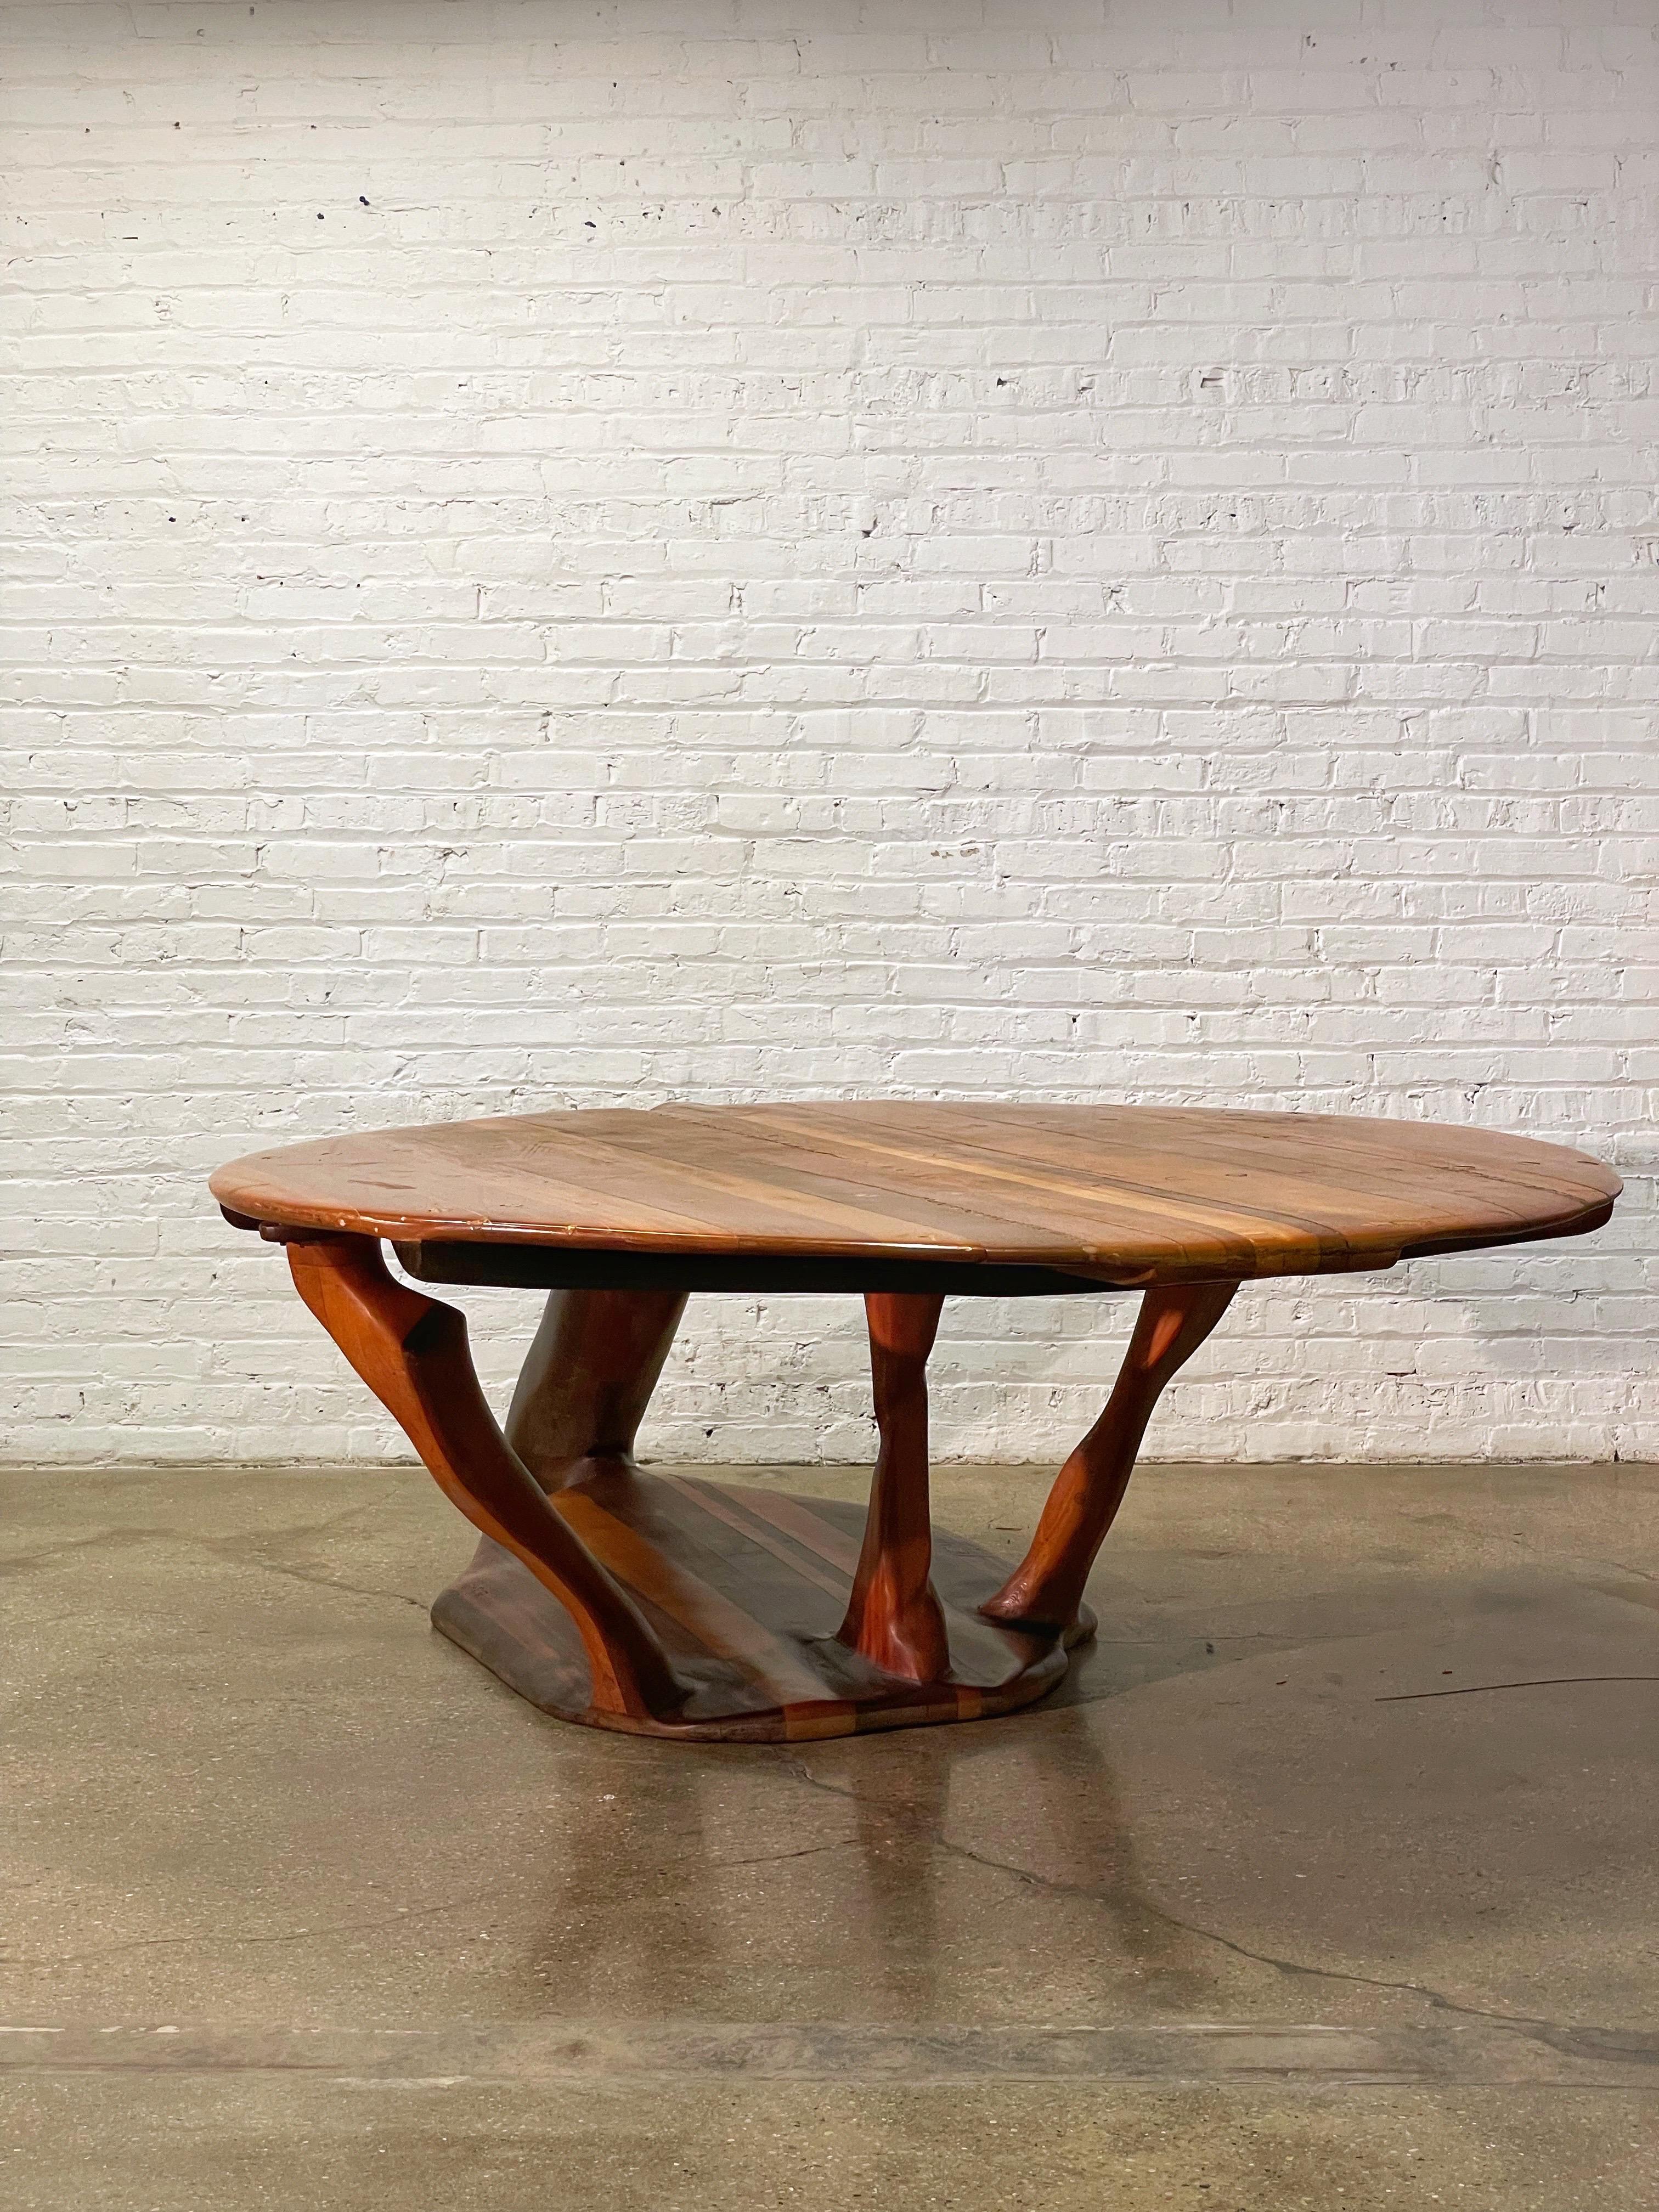 American One Of A Kind Sculptural Studio Craft Dining Table For Sale